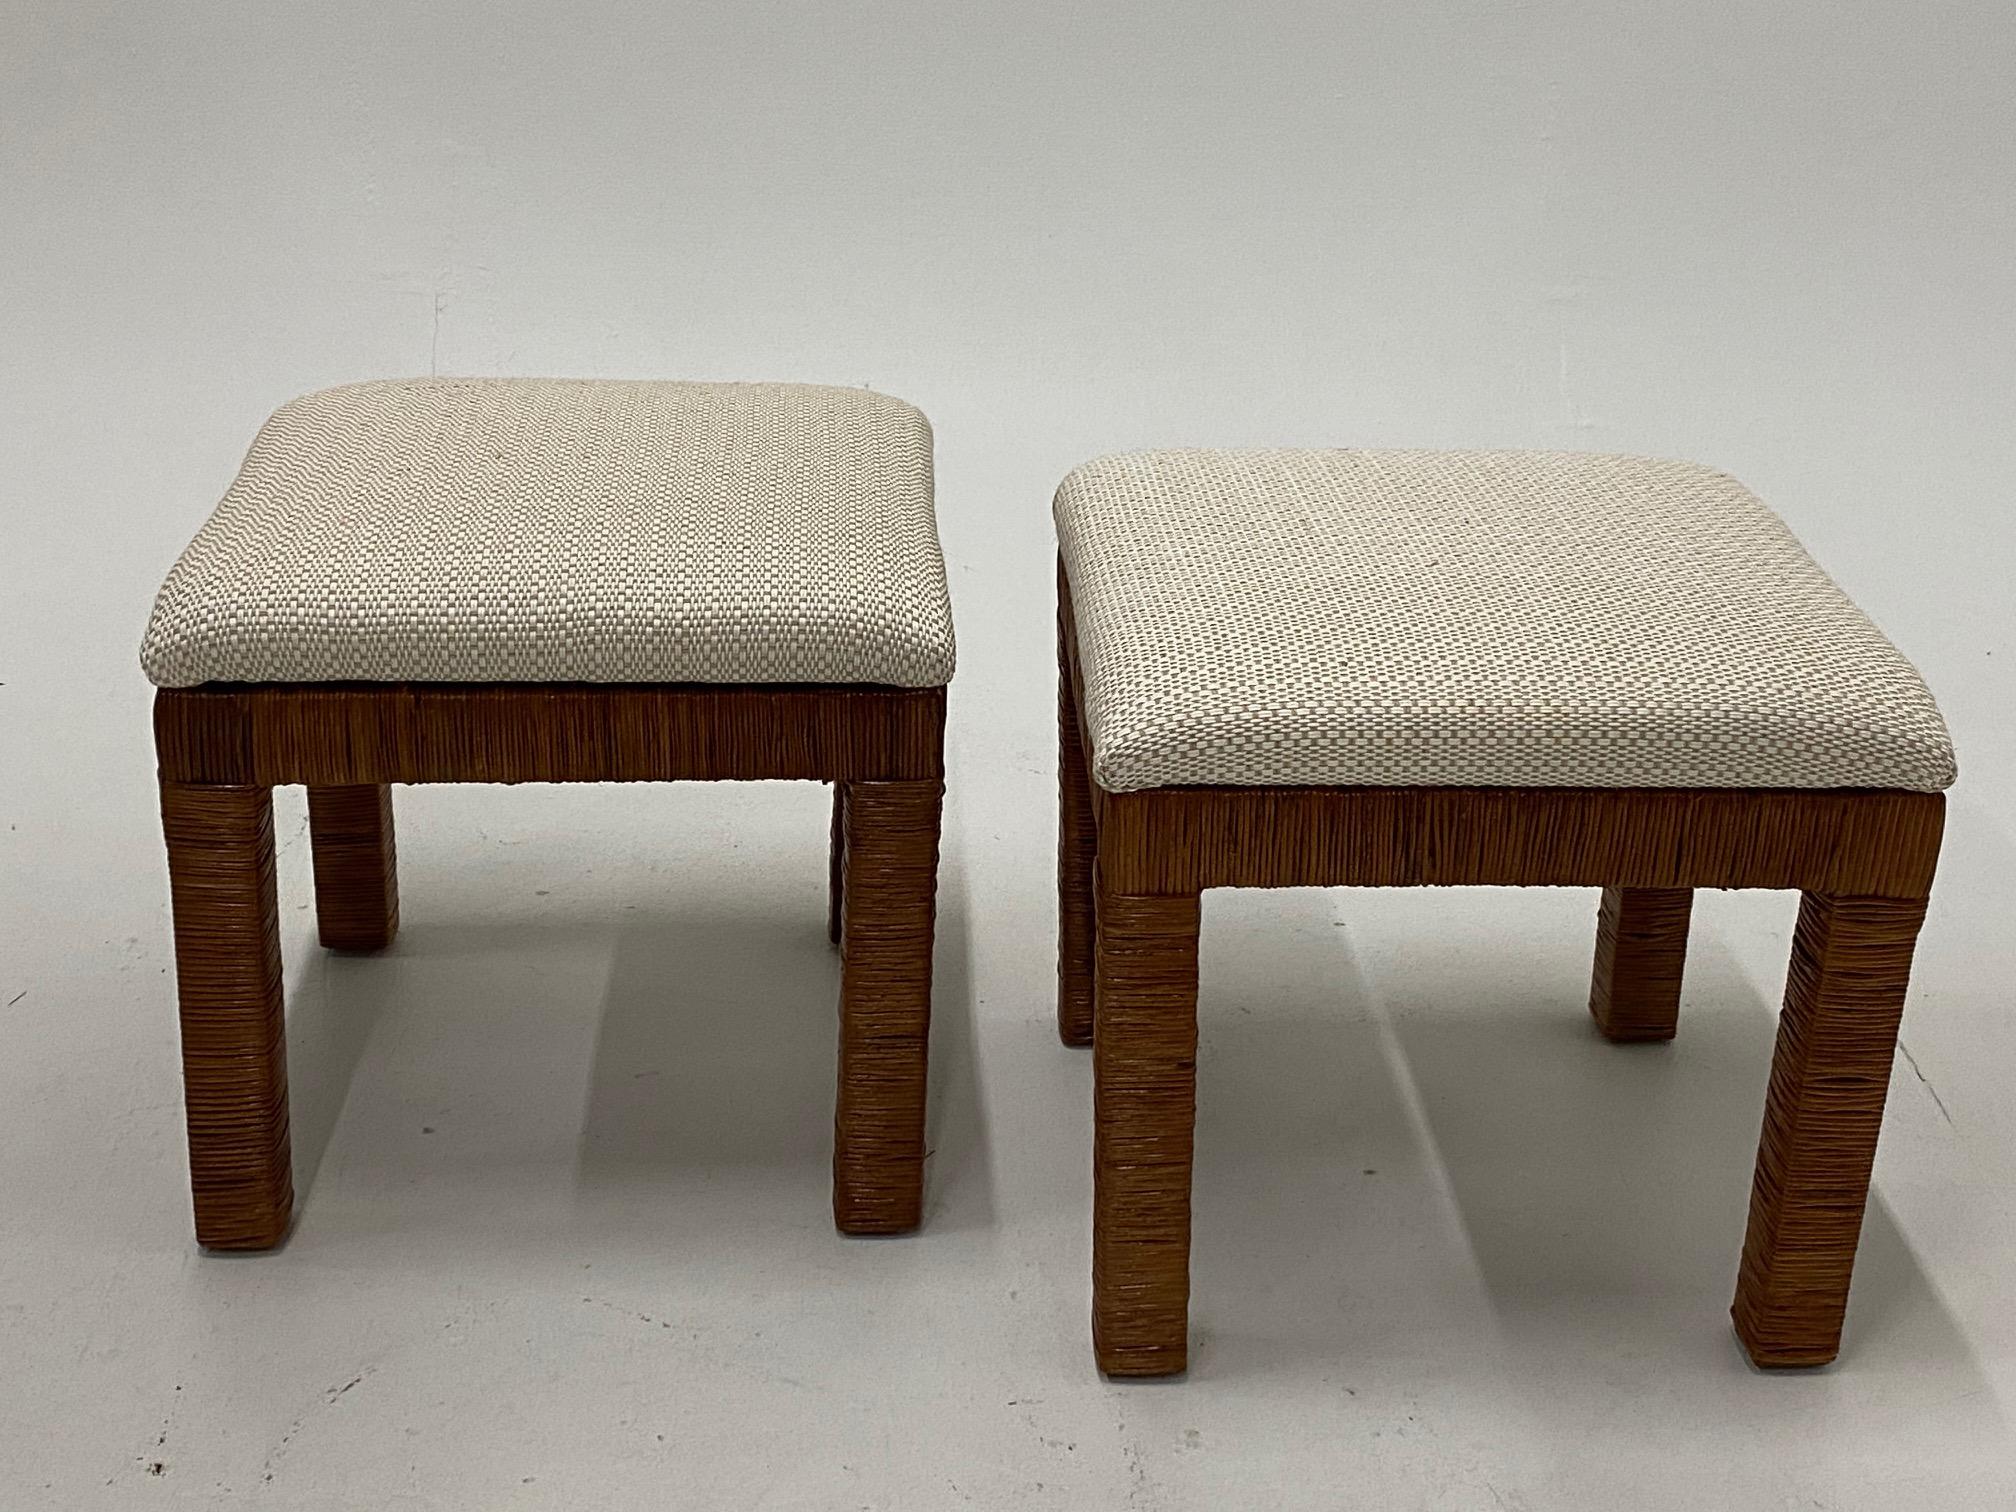 Two organic modern wicker benches having new upholstery woven with raffia.